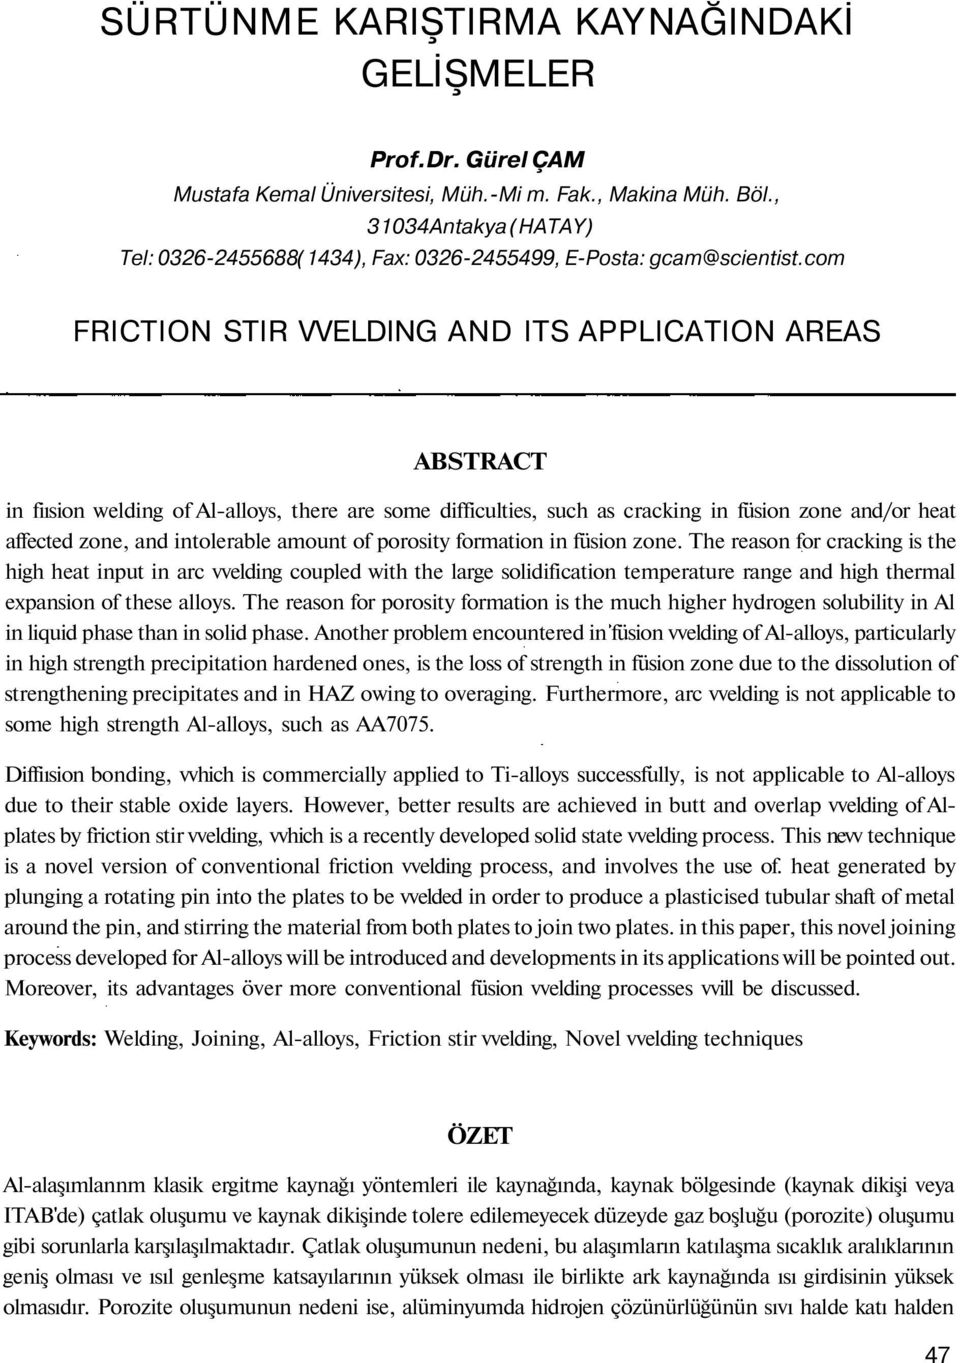 com FRICTION STIR VVELDING AND ITS APPLICATION AREAS ABSTRACT in fiısion welding of Al-alloys, there are some difficulties, such as cracking in füsion zone and/or heat affected zone, and intolerable